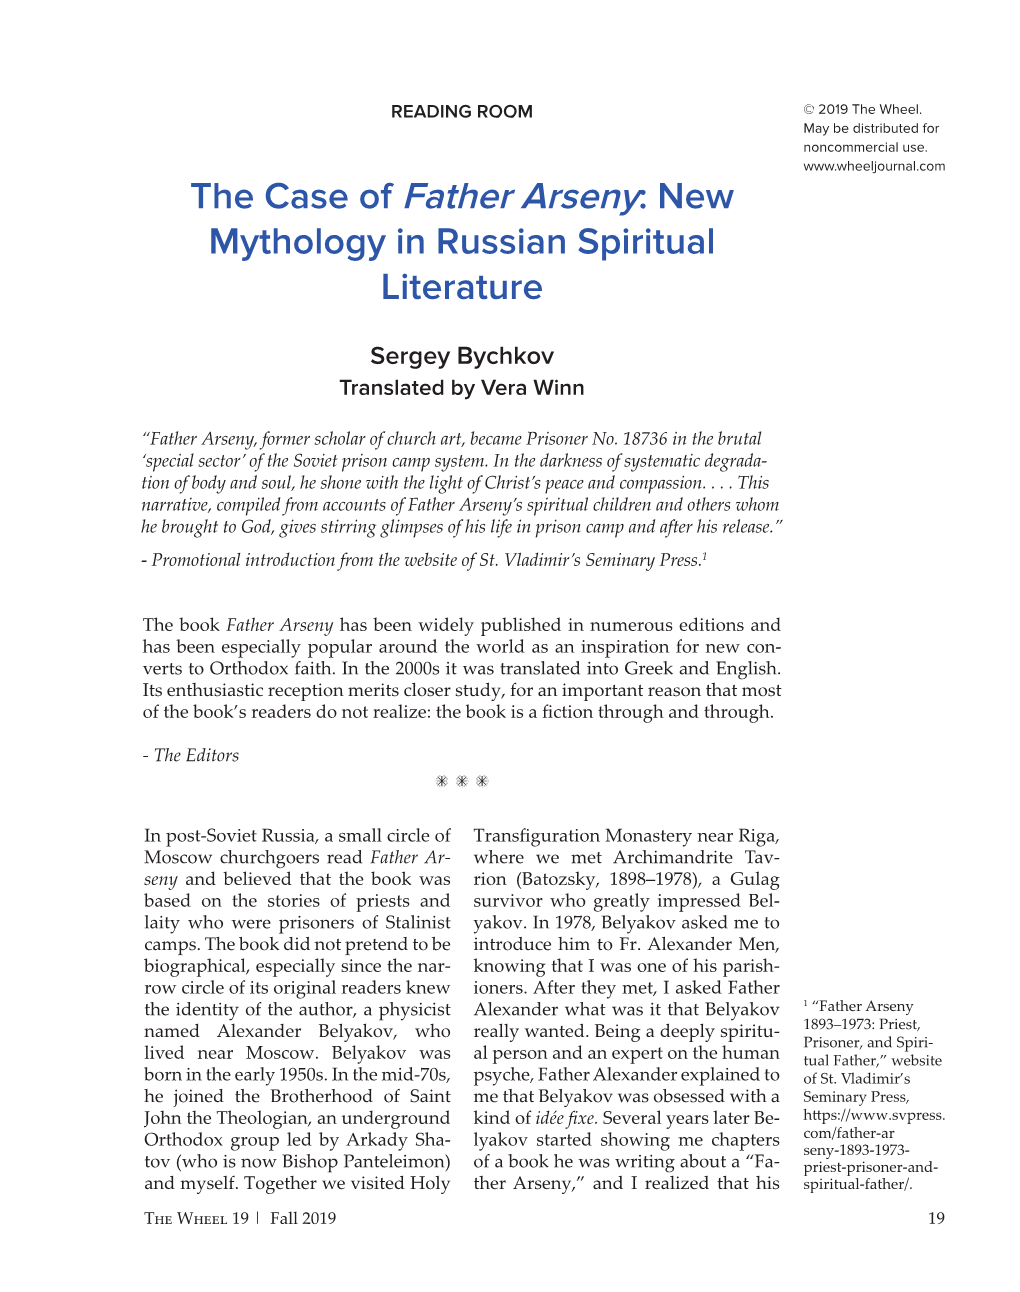 The Case of Father Arseny: New Mythology in Russian Spiritual Literature